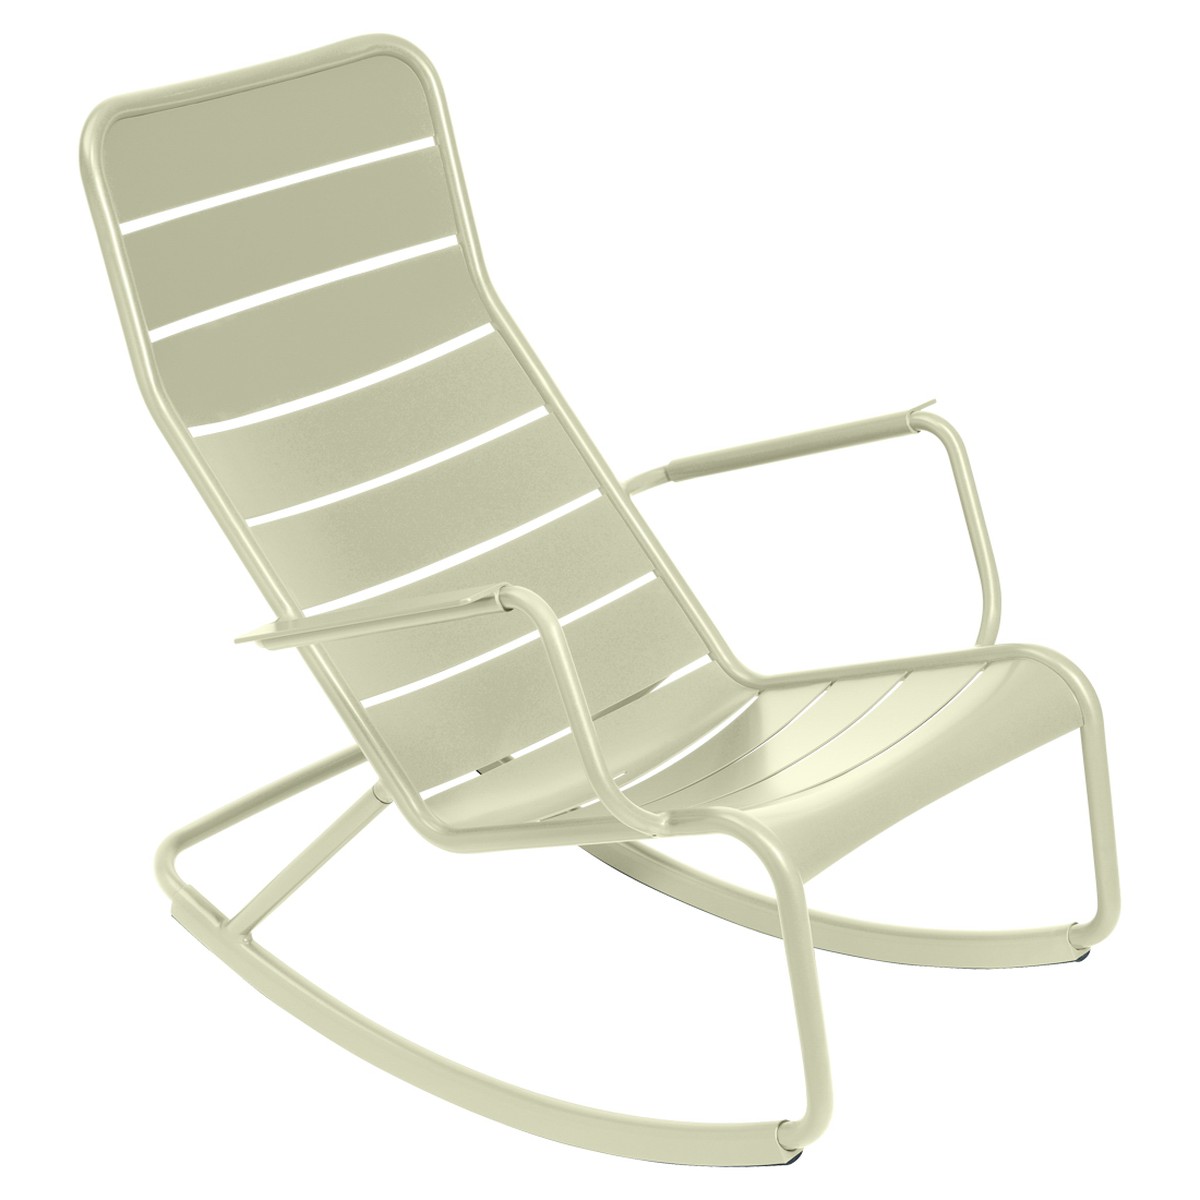 Fermob Luxembourg Rocking Chair Luxembourg Vert tilleul L 105 x l 69.5 x H92cm